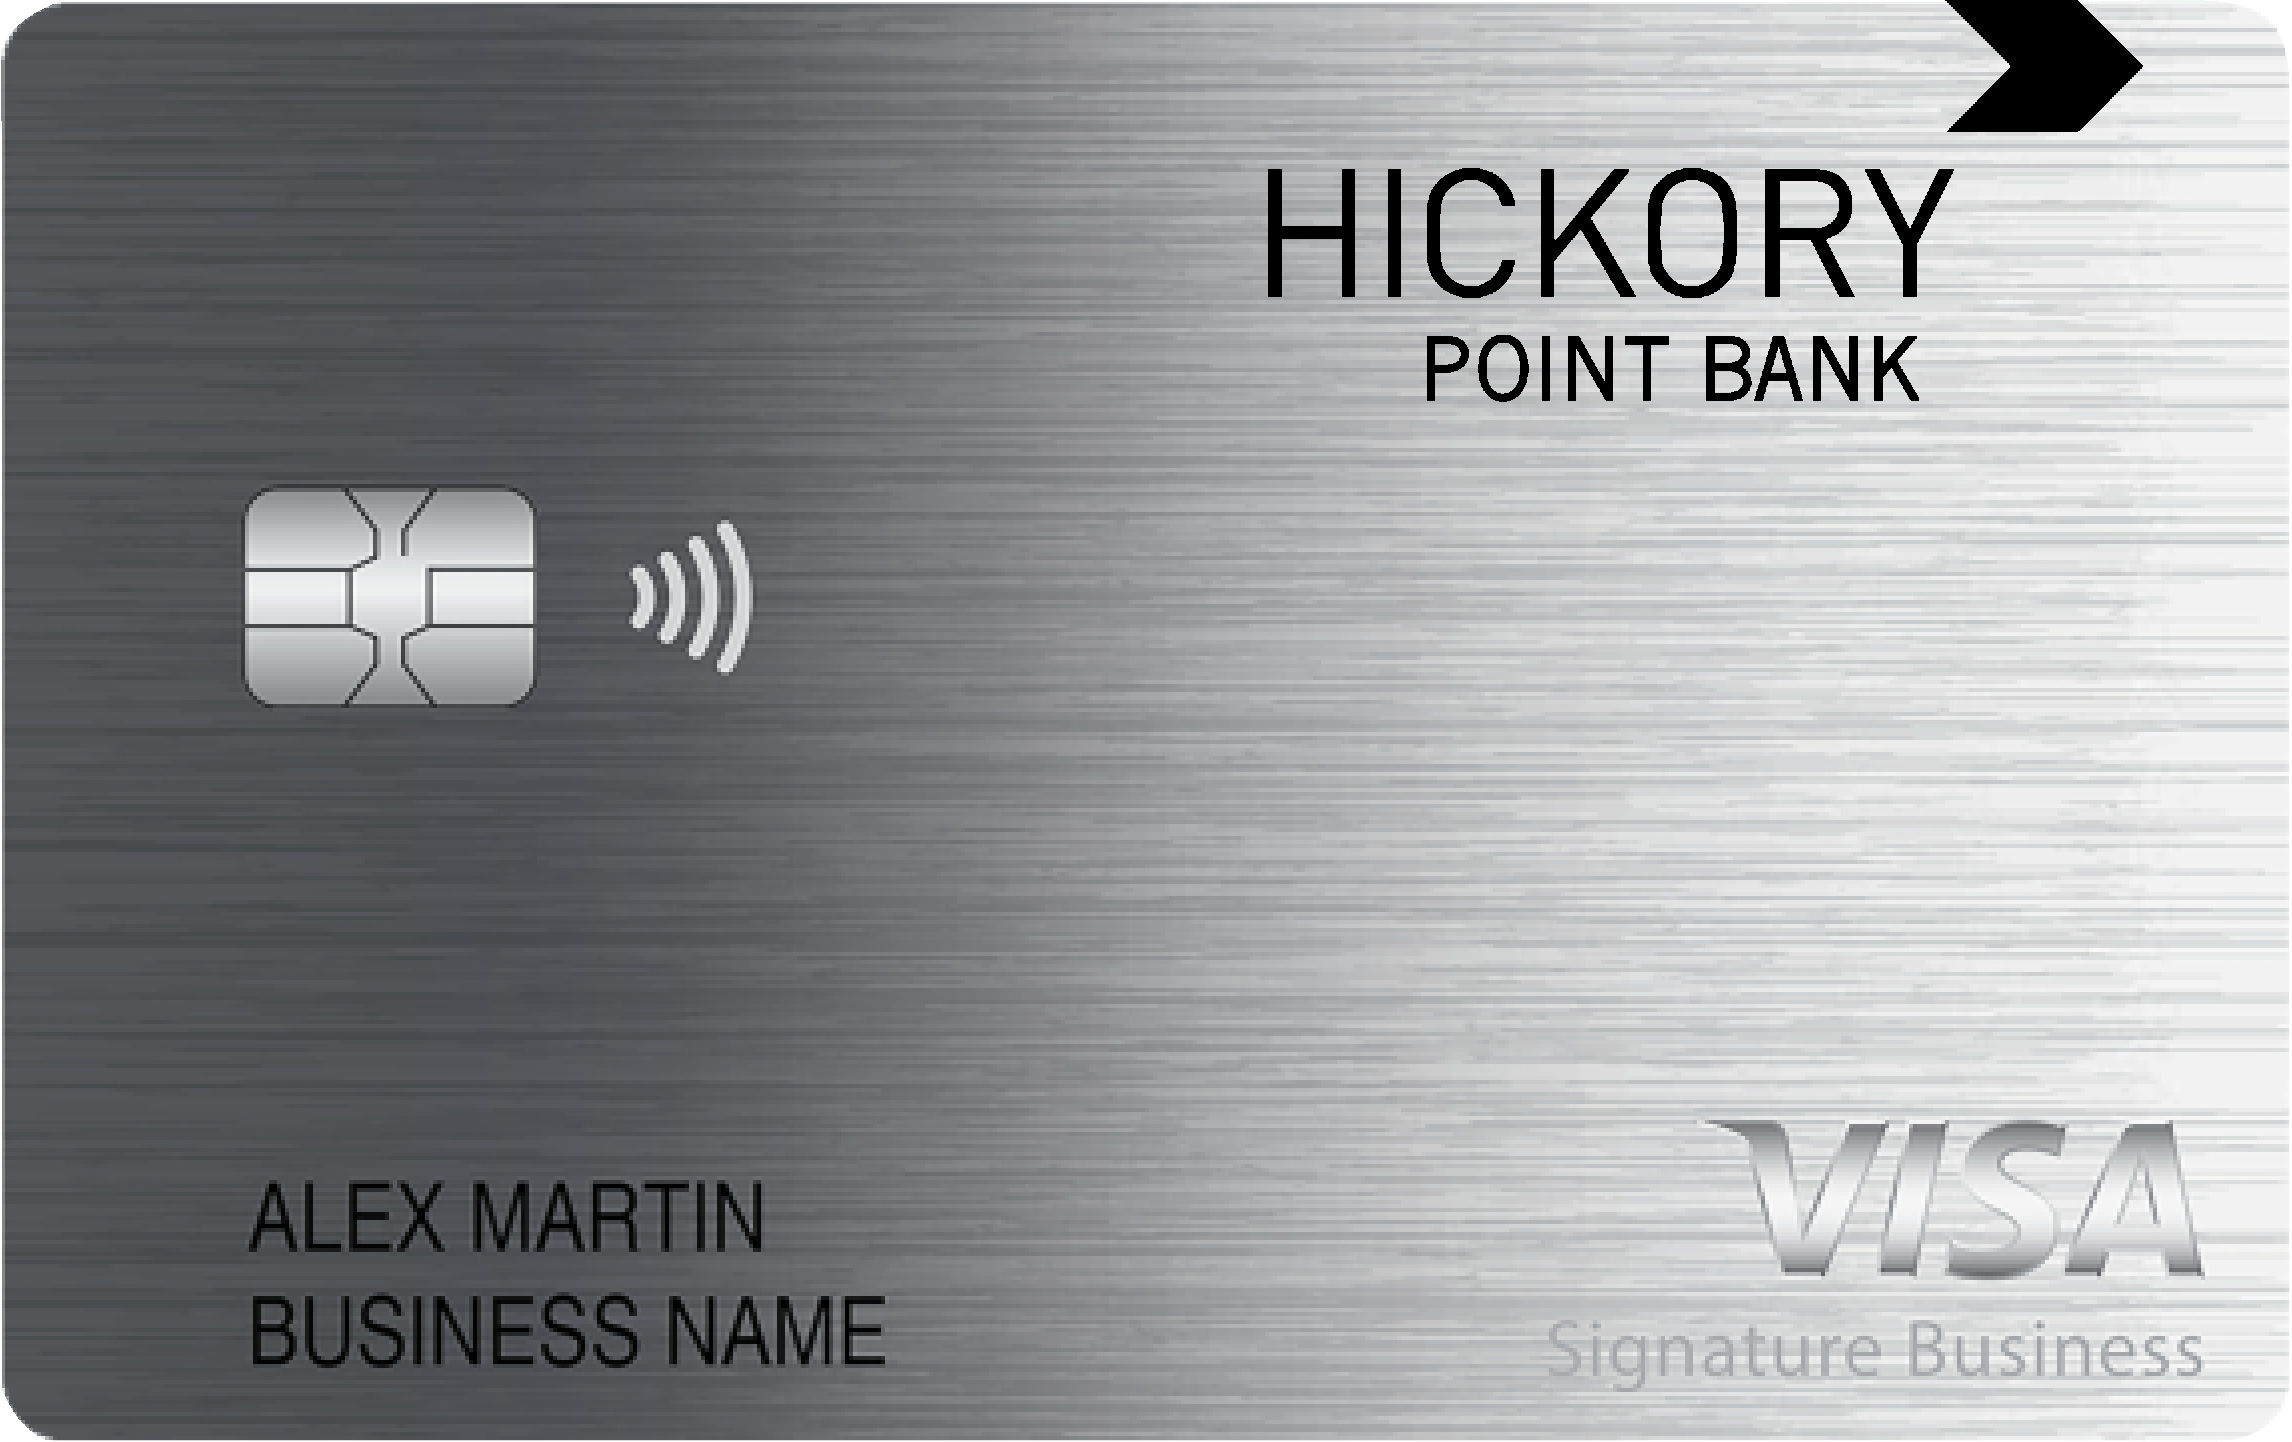 Hickory Point Bank & Trust Smart Business Rewards Card